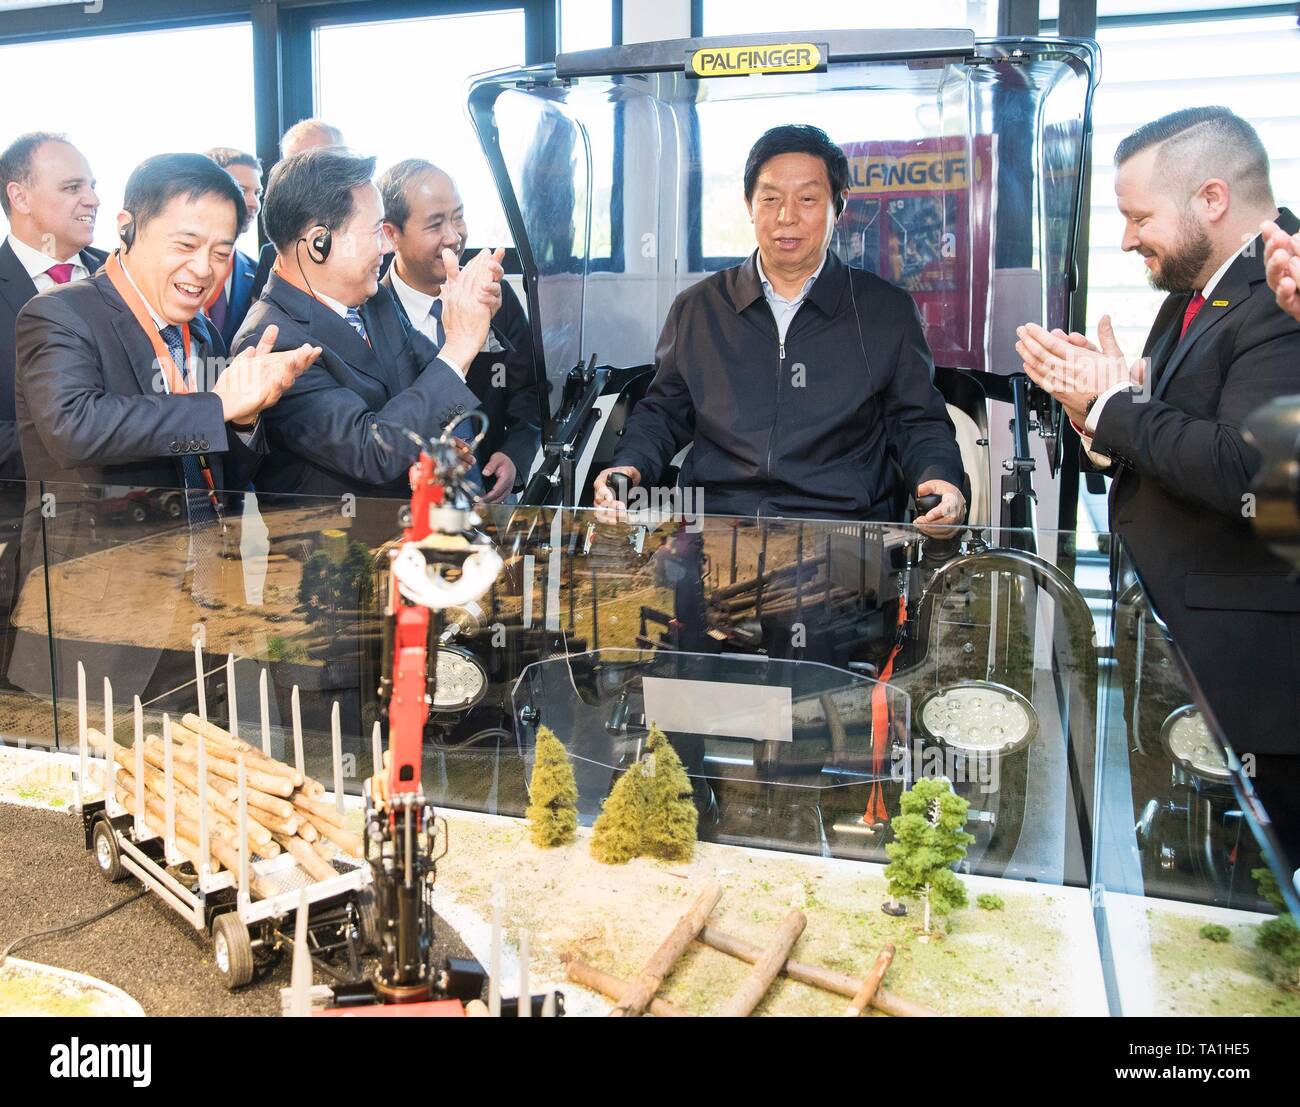 Vienna, Austria. 19th May, 2019. Li Zhanshu (2nd R), chairman of the Standing Committee of the National People's Congress (NPC), visits Palfinger, an Austria-based crane manufacturing company, in Salzburg, Austria, on May 19, 2019. China's top legislator Li Zhanshu paid an official friendly visit from May 18 to 21 to Austria, where he met with Austrian leaders on promoting bilateral ties and expressed China's stance on upholding multilateralism and free trade. Credit: Huang Jingwen/Xinhua/Alamy Live News Stock Photo